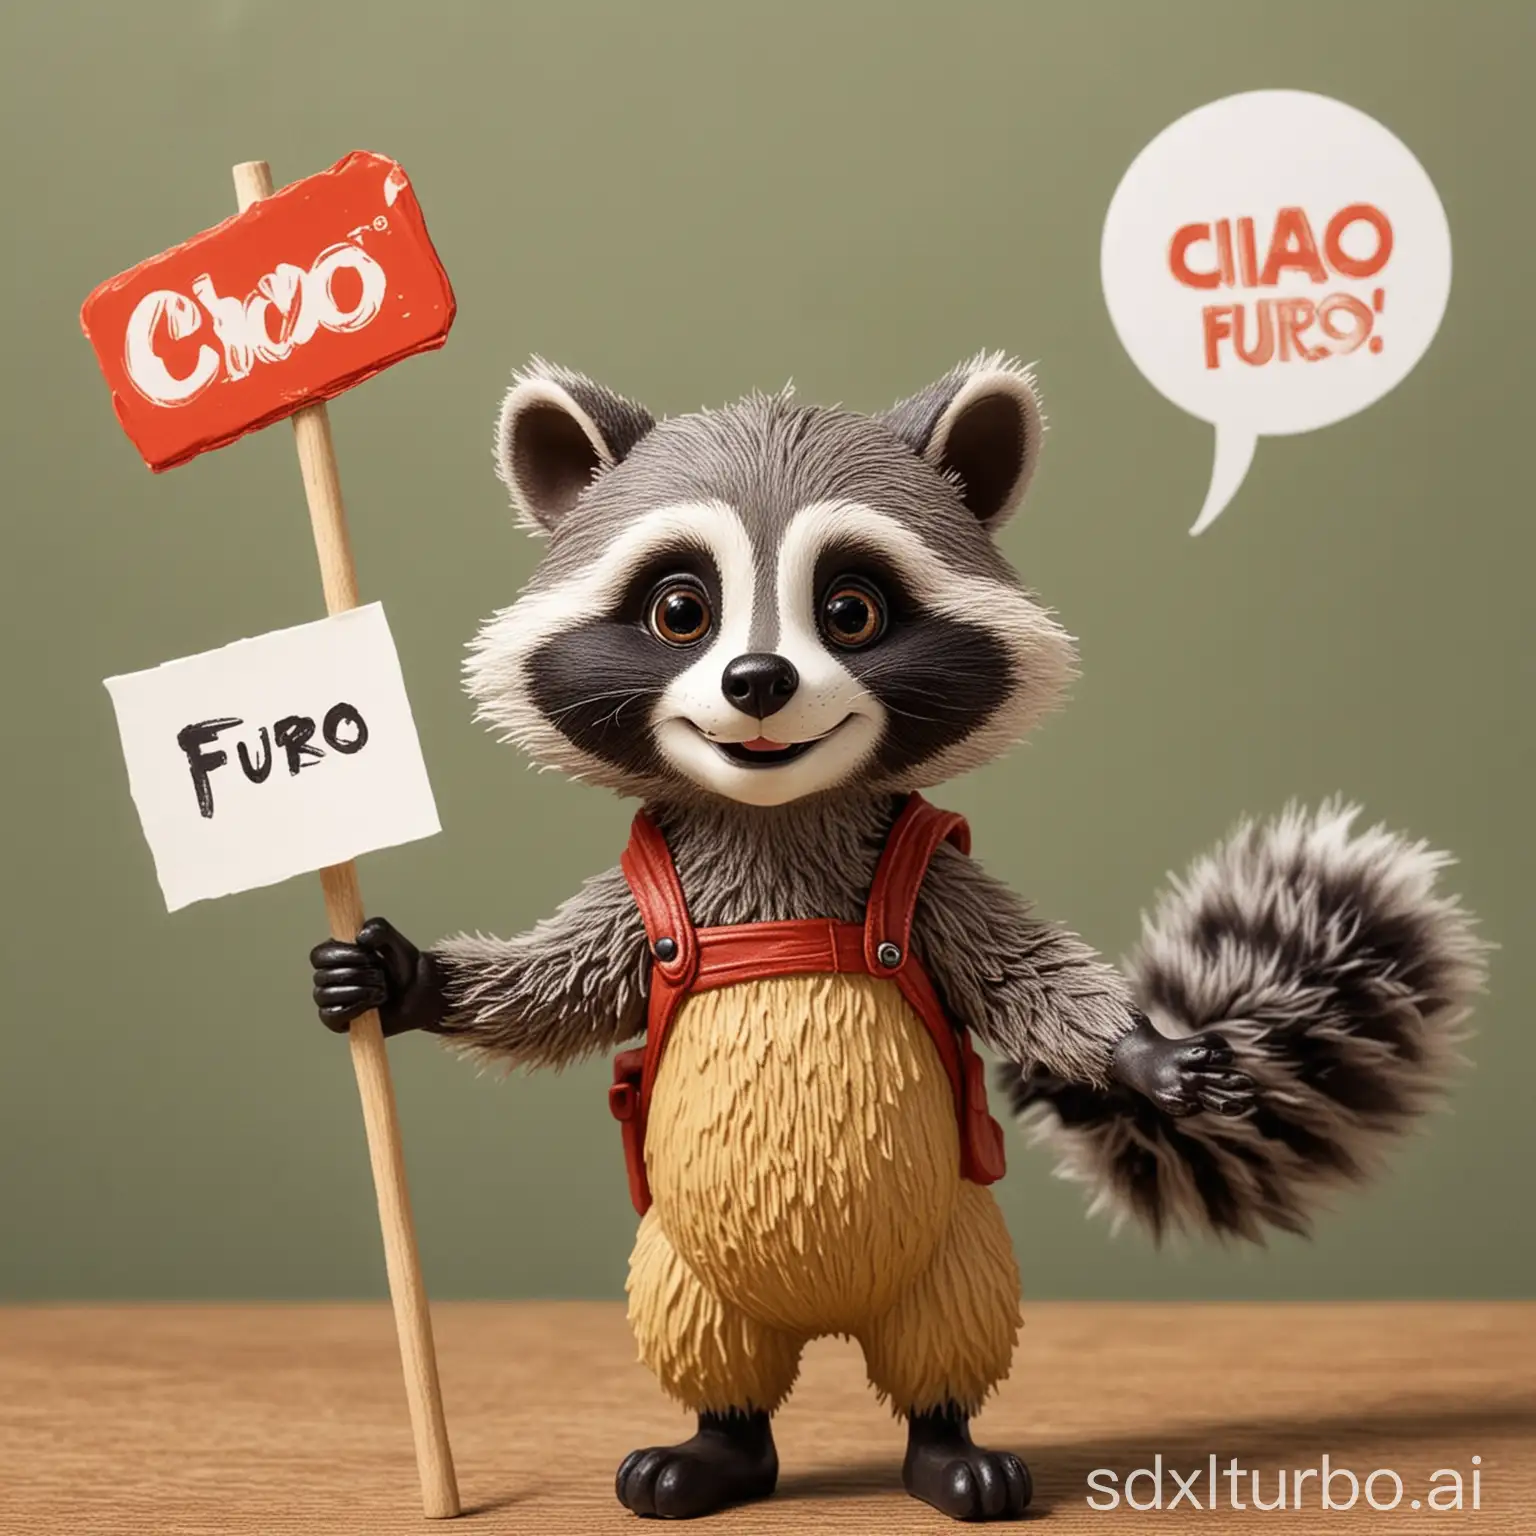 a detailed belgian comic of an happy racoon with a plastic sign with written "CIAO FURO"
